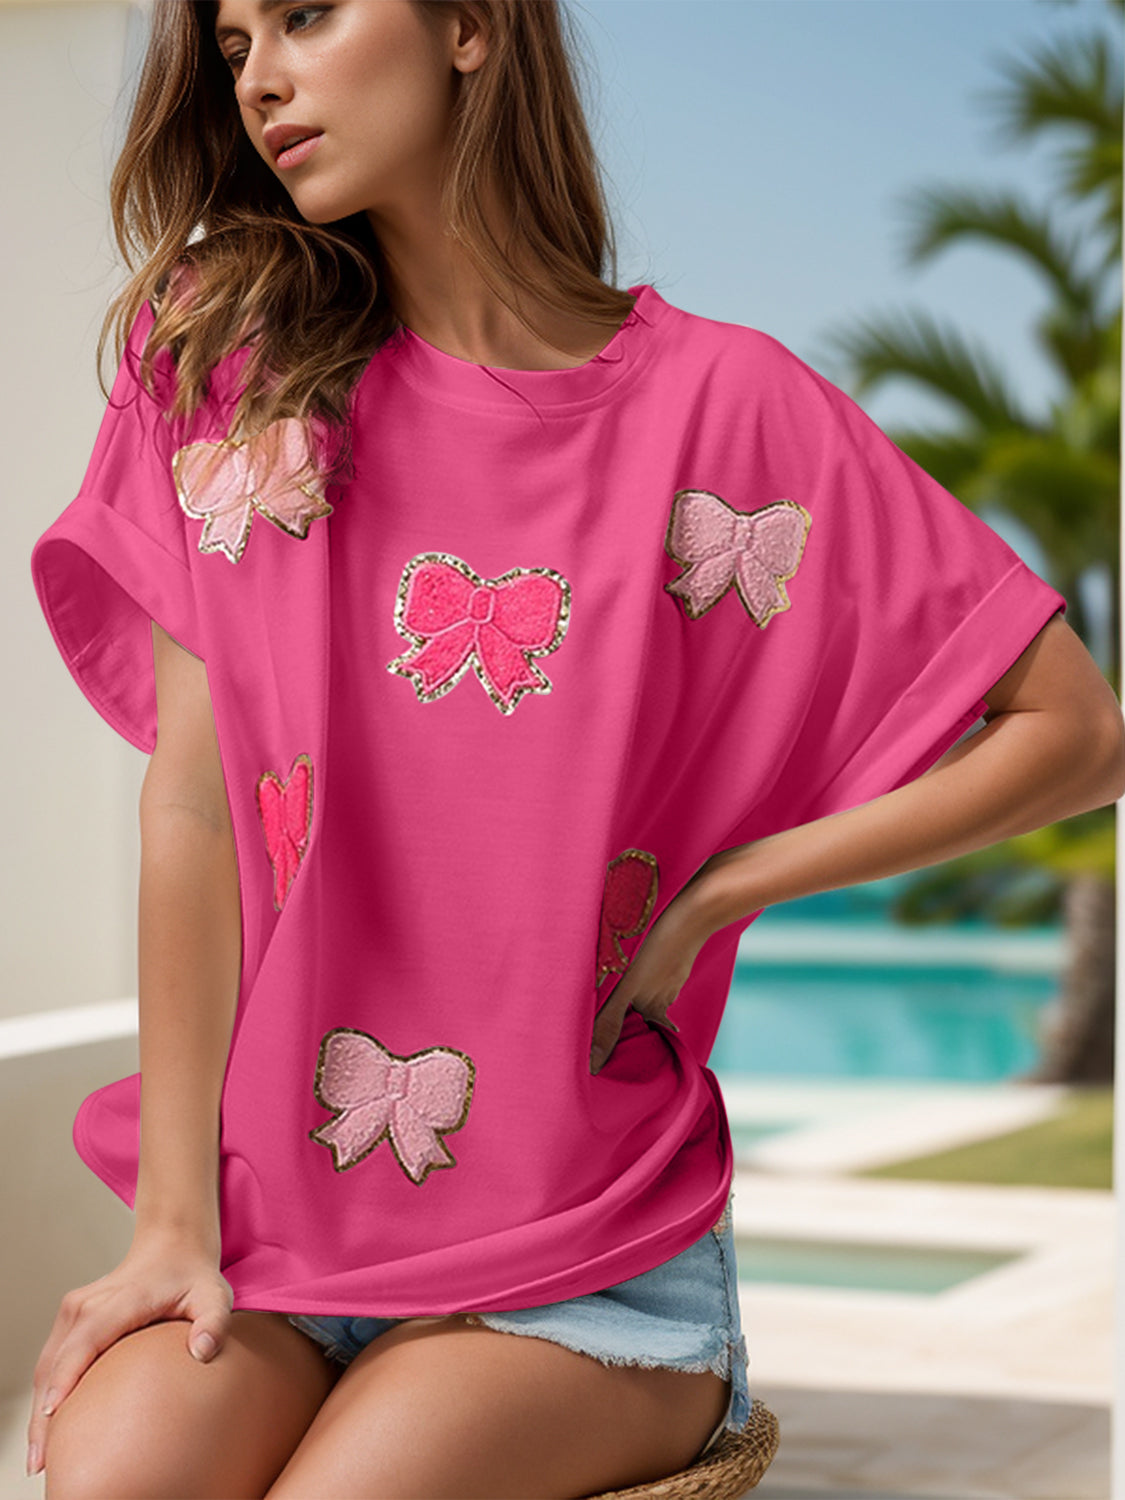 Three images of a woman wearing a sequin bow appliqué t-shirt, available in pink, white, and purple. Each shirt features decorative sequin bows, styled casually with denim shorts and worn by the model in a sunny, poolside setting.